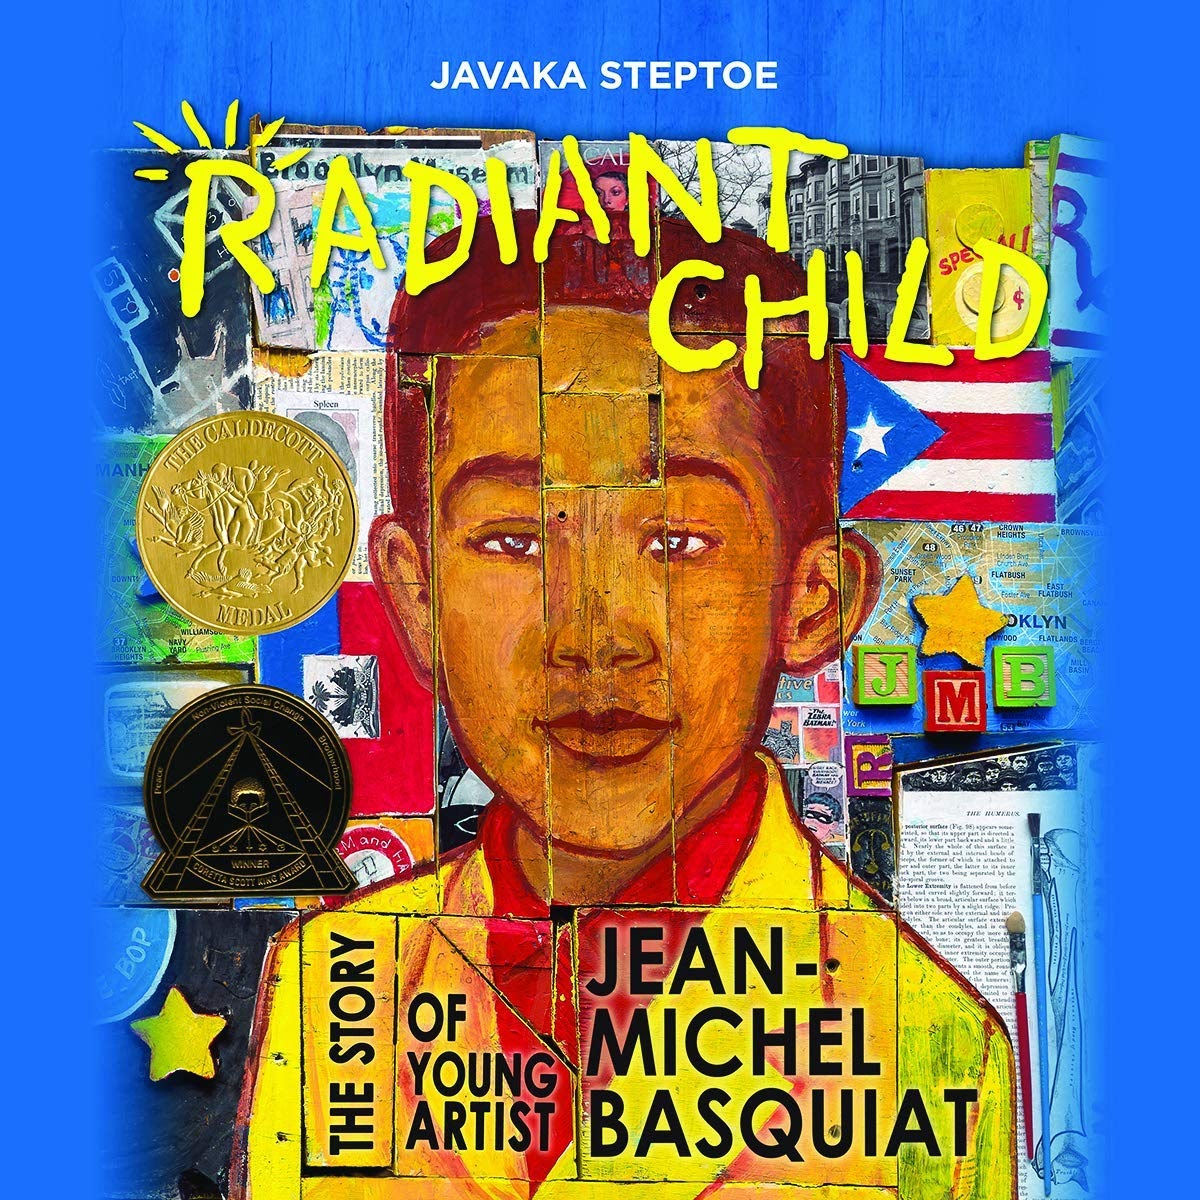 Cover photo of the book entitled, Radiant Child: The Story of Young Artist Jean-Michel Basquiat